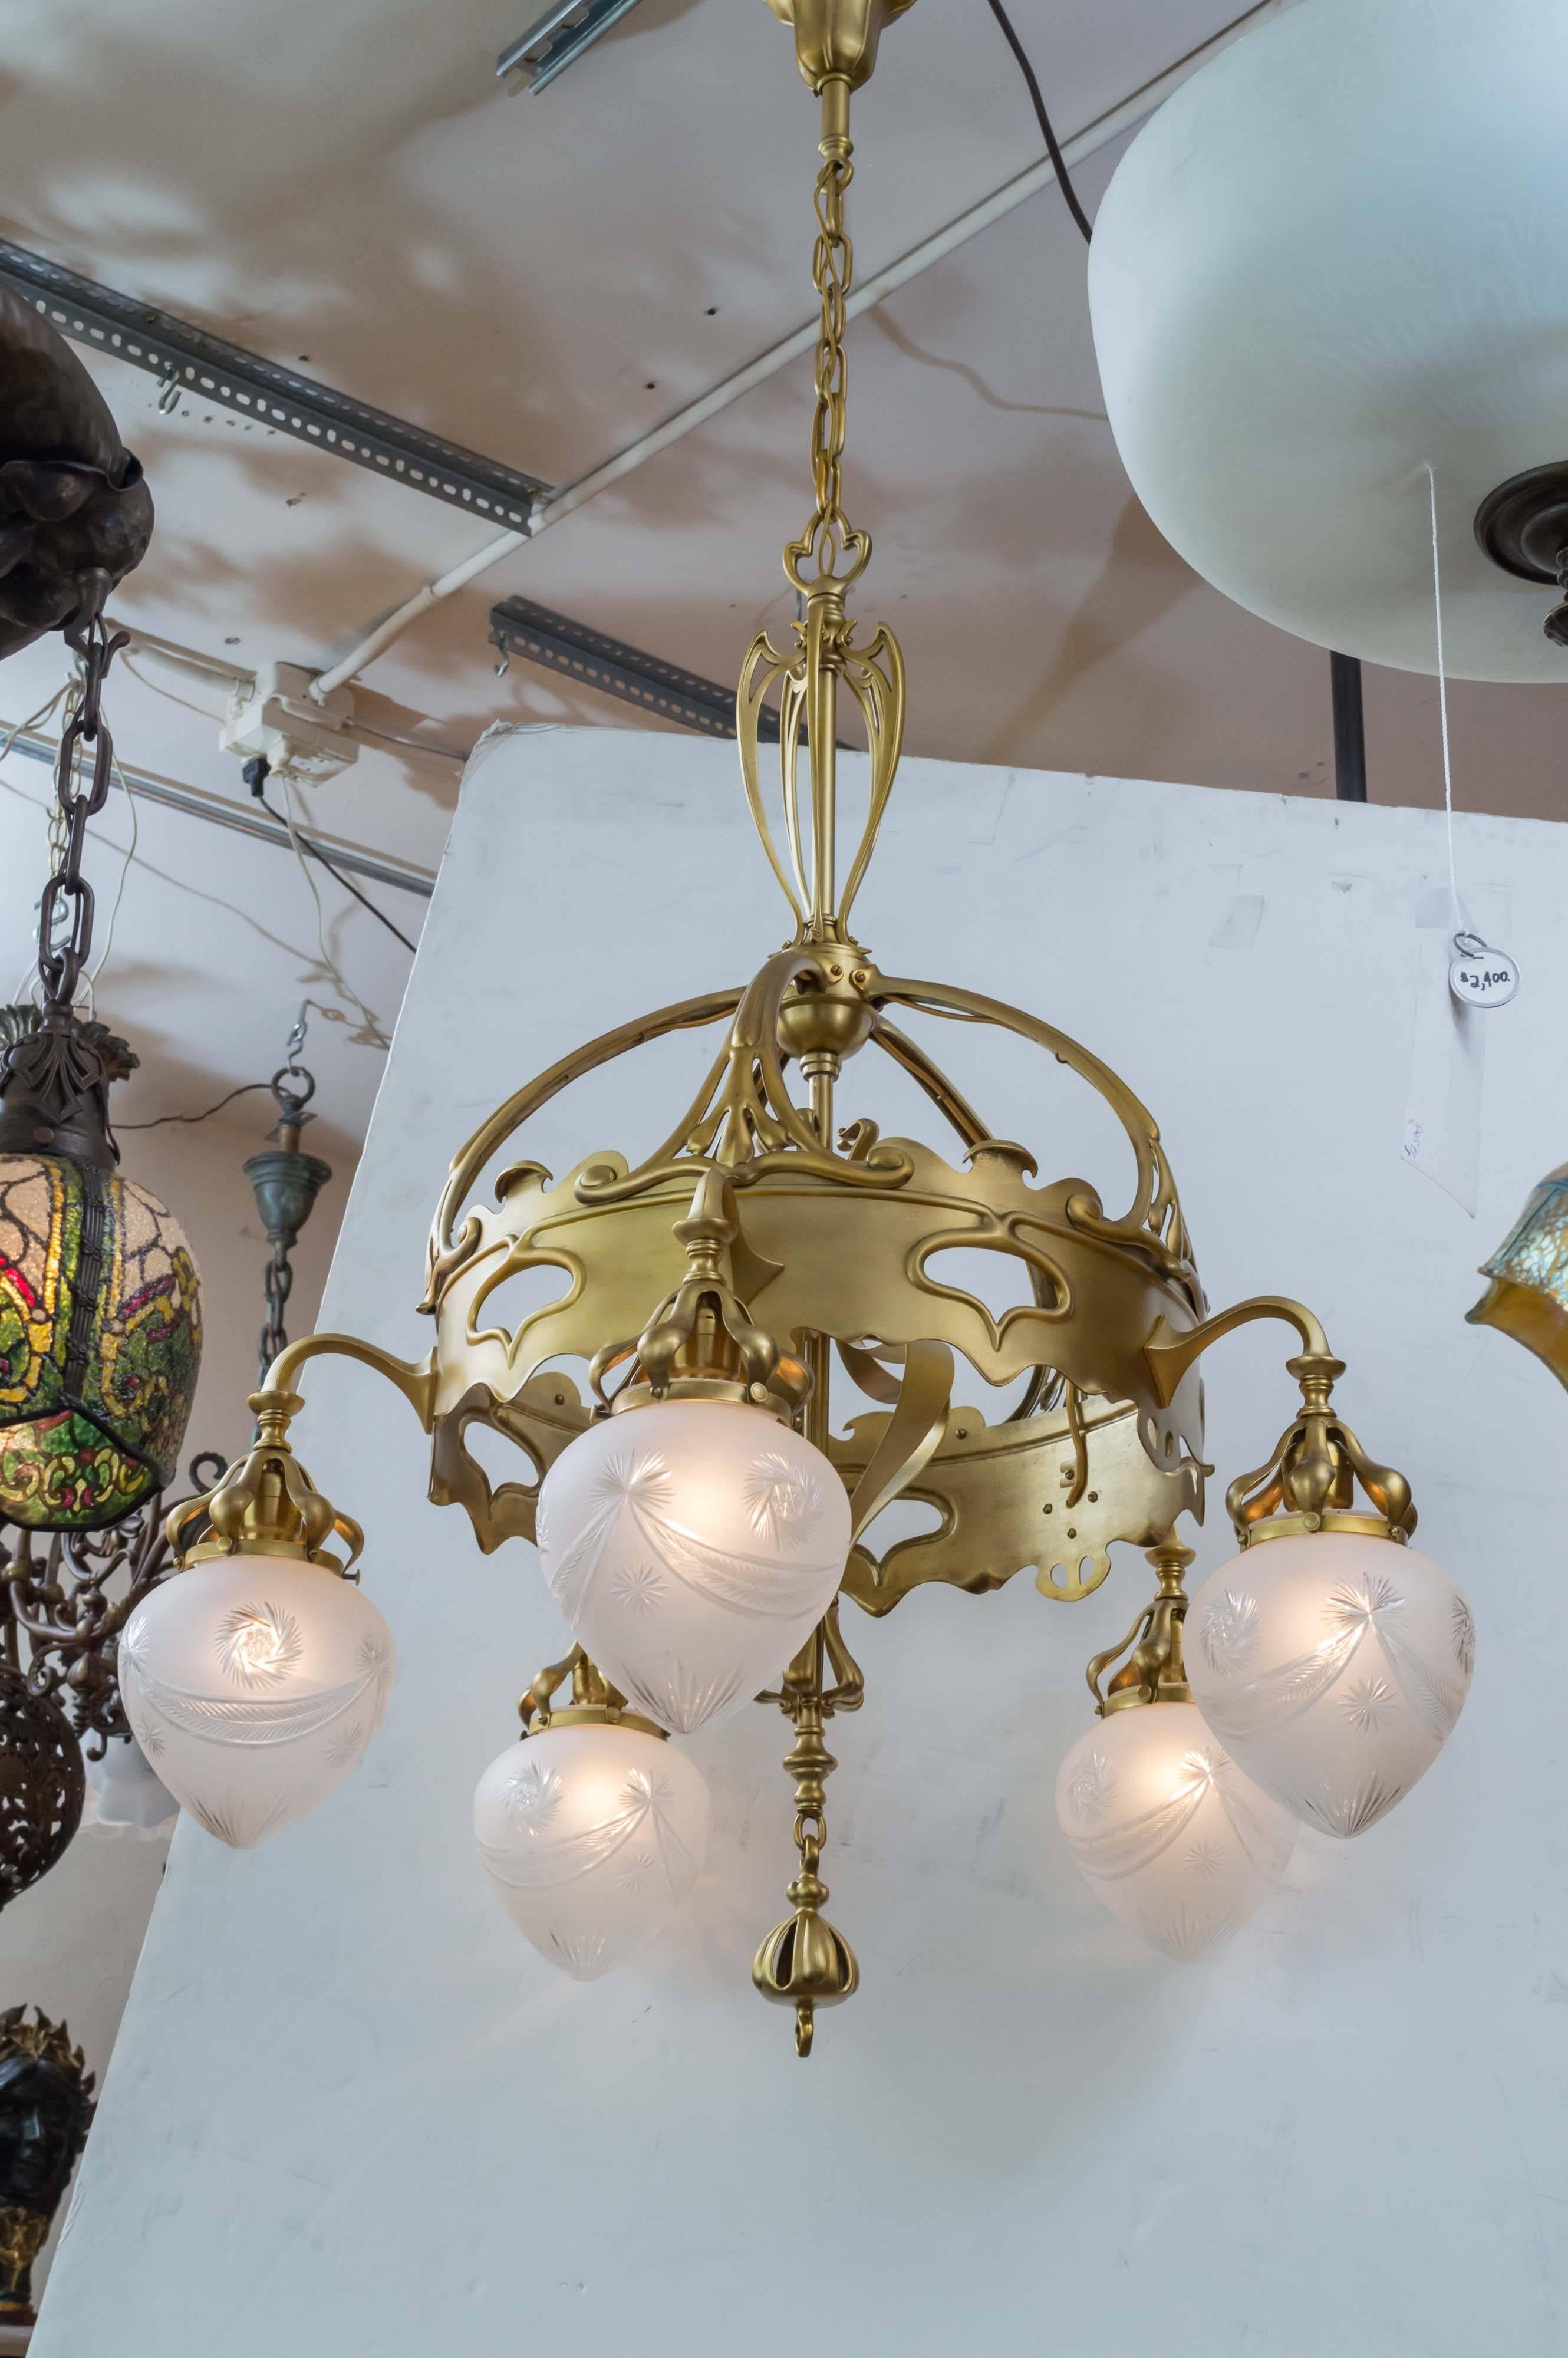 This quite incredible Art Nouveau chandelier has all the characteristics that make this style a favorite of most of our clients. Definitely one of the finest examples of this style we have offered in quite a while. Sinewy lines everywhere and airy